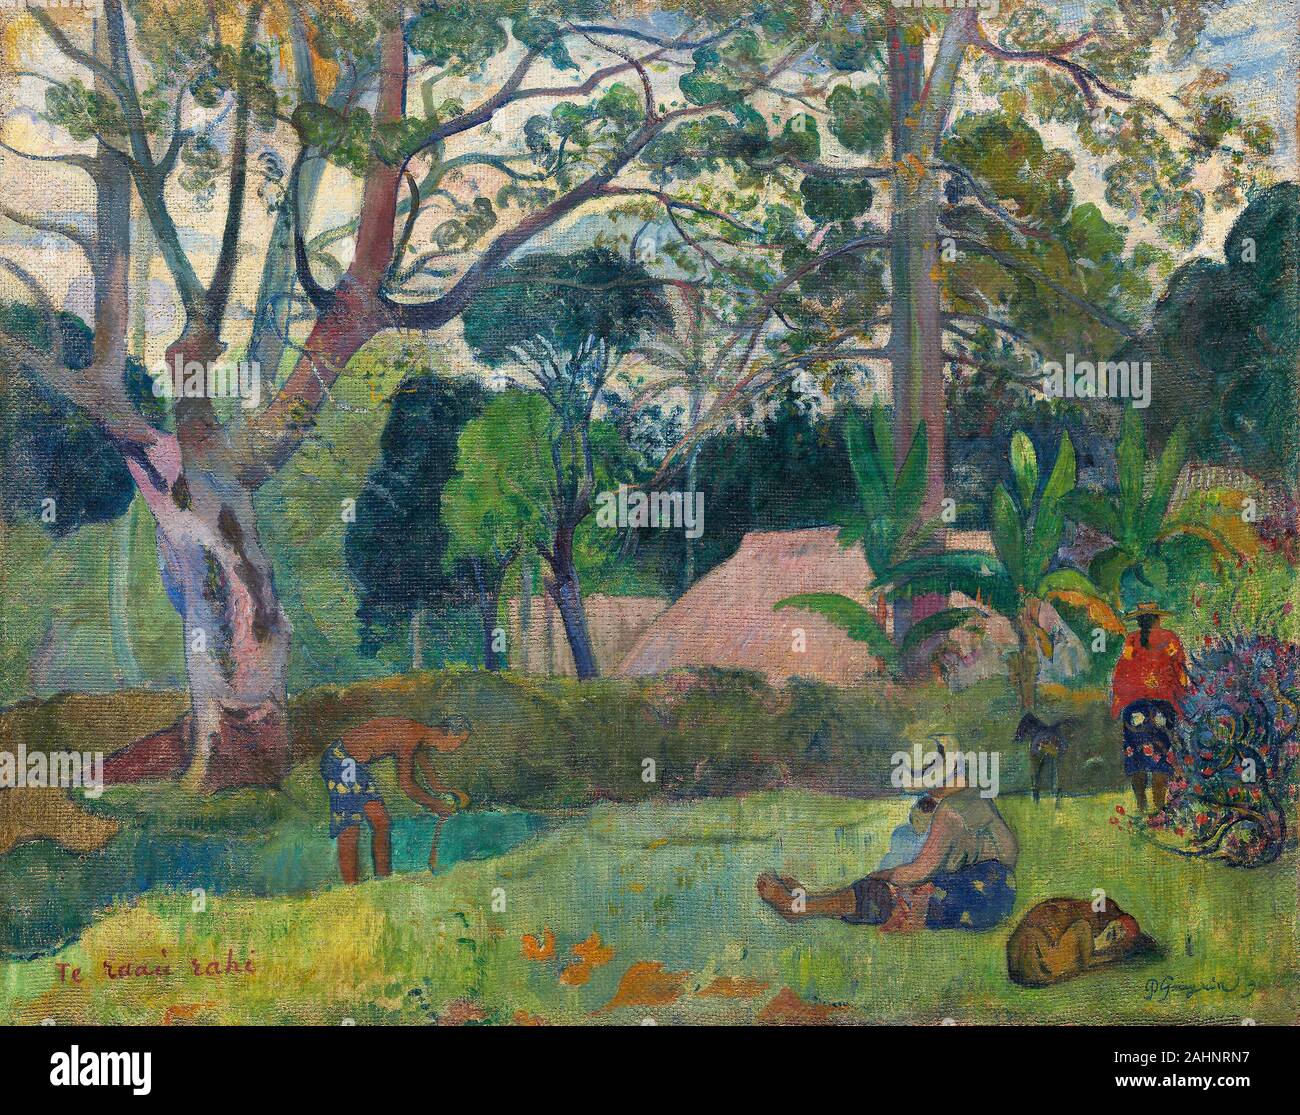 Paul Gauguin. Te raau rahi (The Big Tree). 1891. France. Oil on jute canvas Upon arriving in Tahiti in June 1891, Paul Gauguin was keen to observe and understand the local vegetation. The big tree referred to in the title of this painting is the hotu tree at left. On the right, a tropical almond tree rises behind a screen of banana leaves, and along the right edge is a red-blossomed hibiscus shrub. Breadfruit leaves dot the foreground. The work is infused with dreamlike, heightened colors in a highly decorative composition arranged around curving, exuberant lines that transcend the topographic Stock Photo